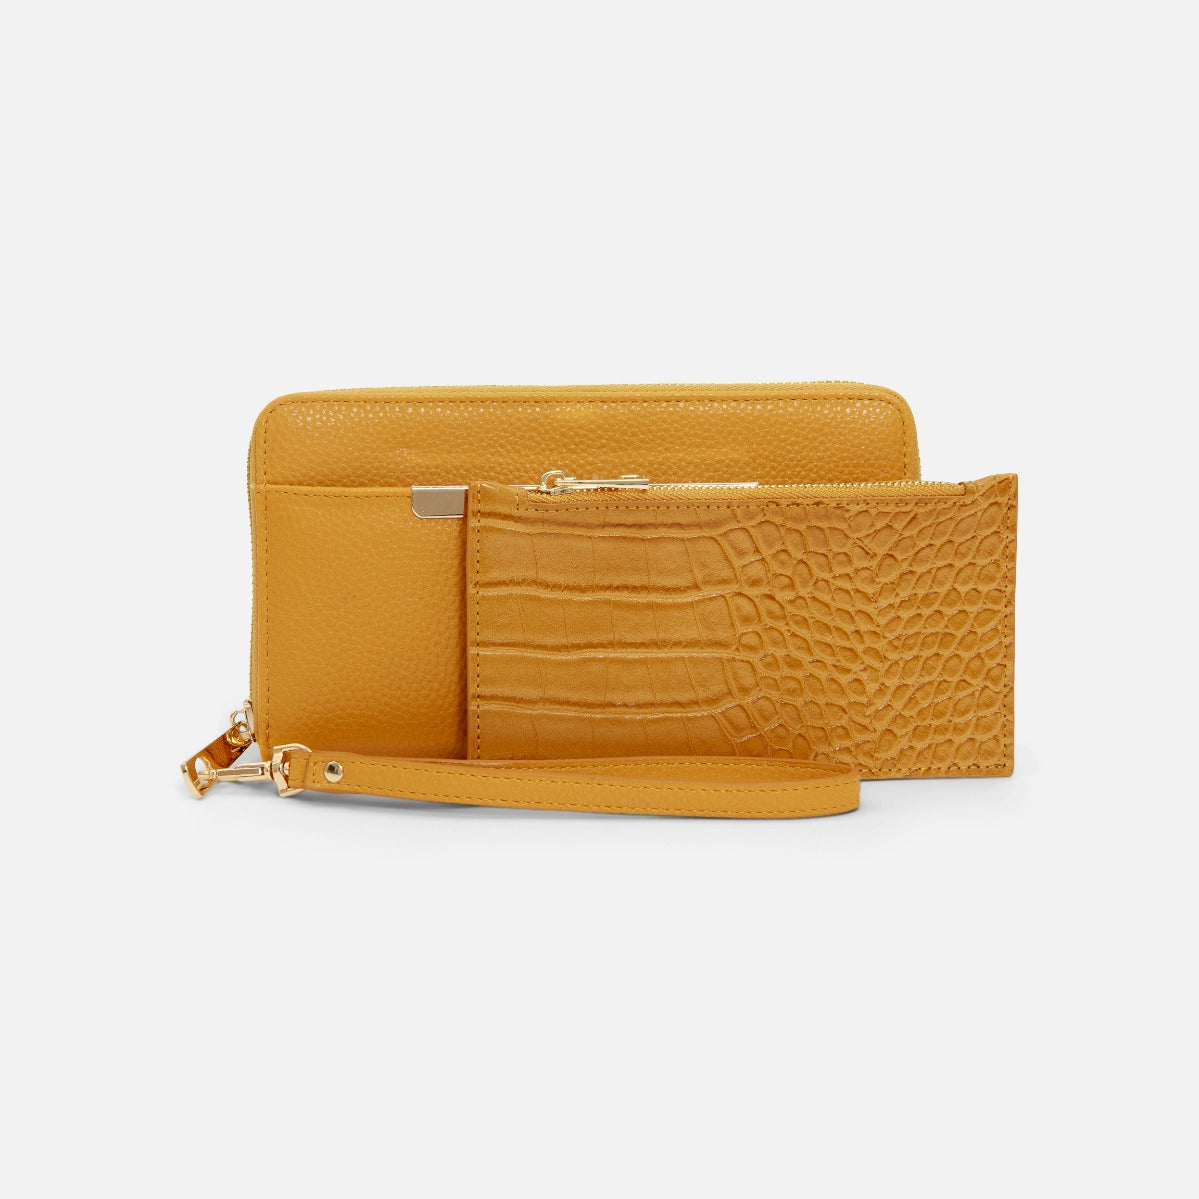 Ocher wallet and golden details with snake effect pattern removable pocket